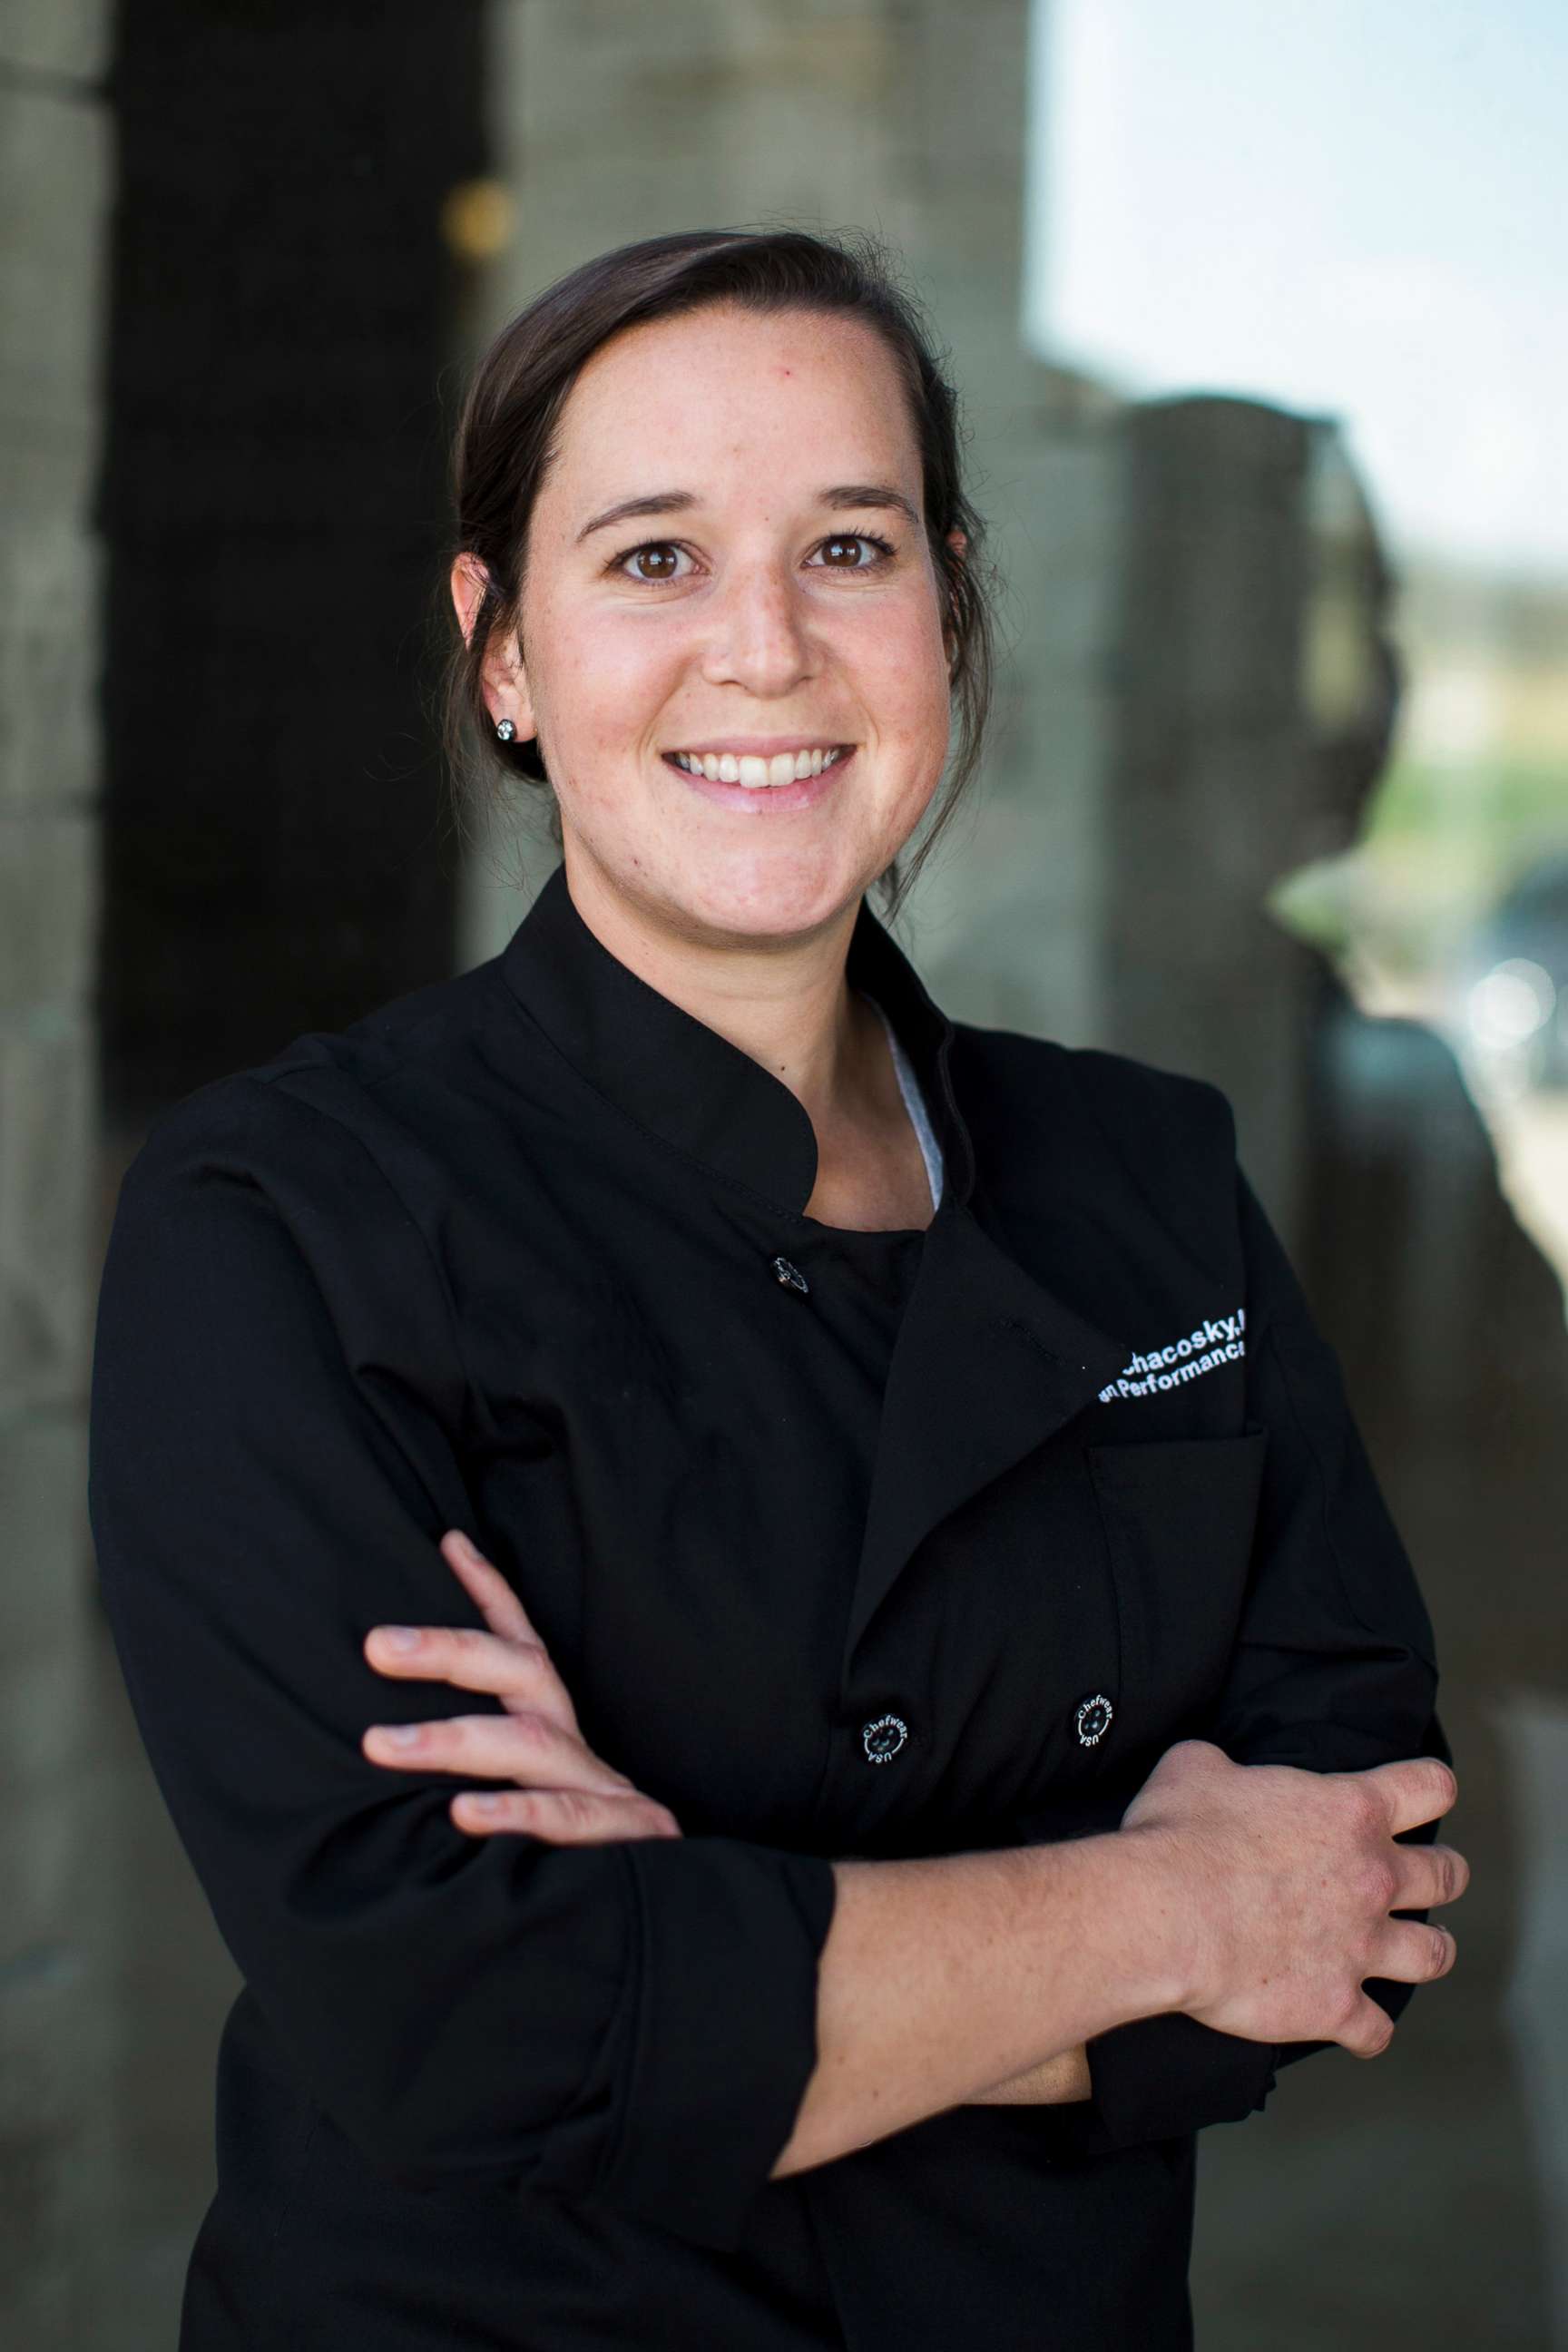 PHOTO: U.S. Ski & Snowboard team high performance chef Megan Chacosky will prepare food for U.S. athletes at the 2018 Winter Olympics in South Korea.